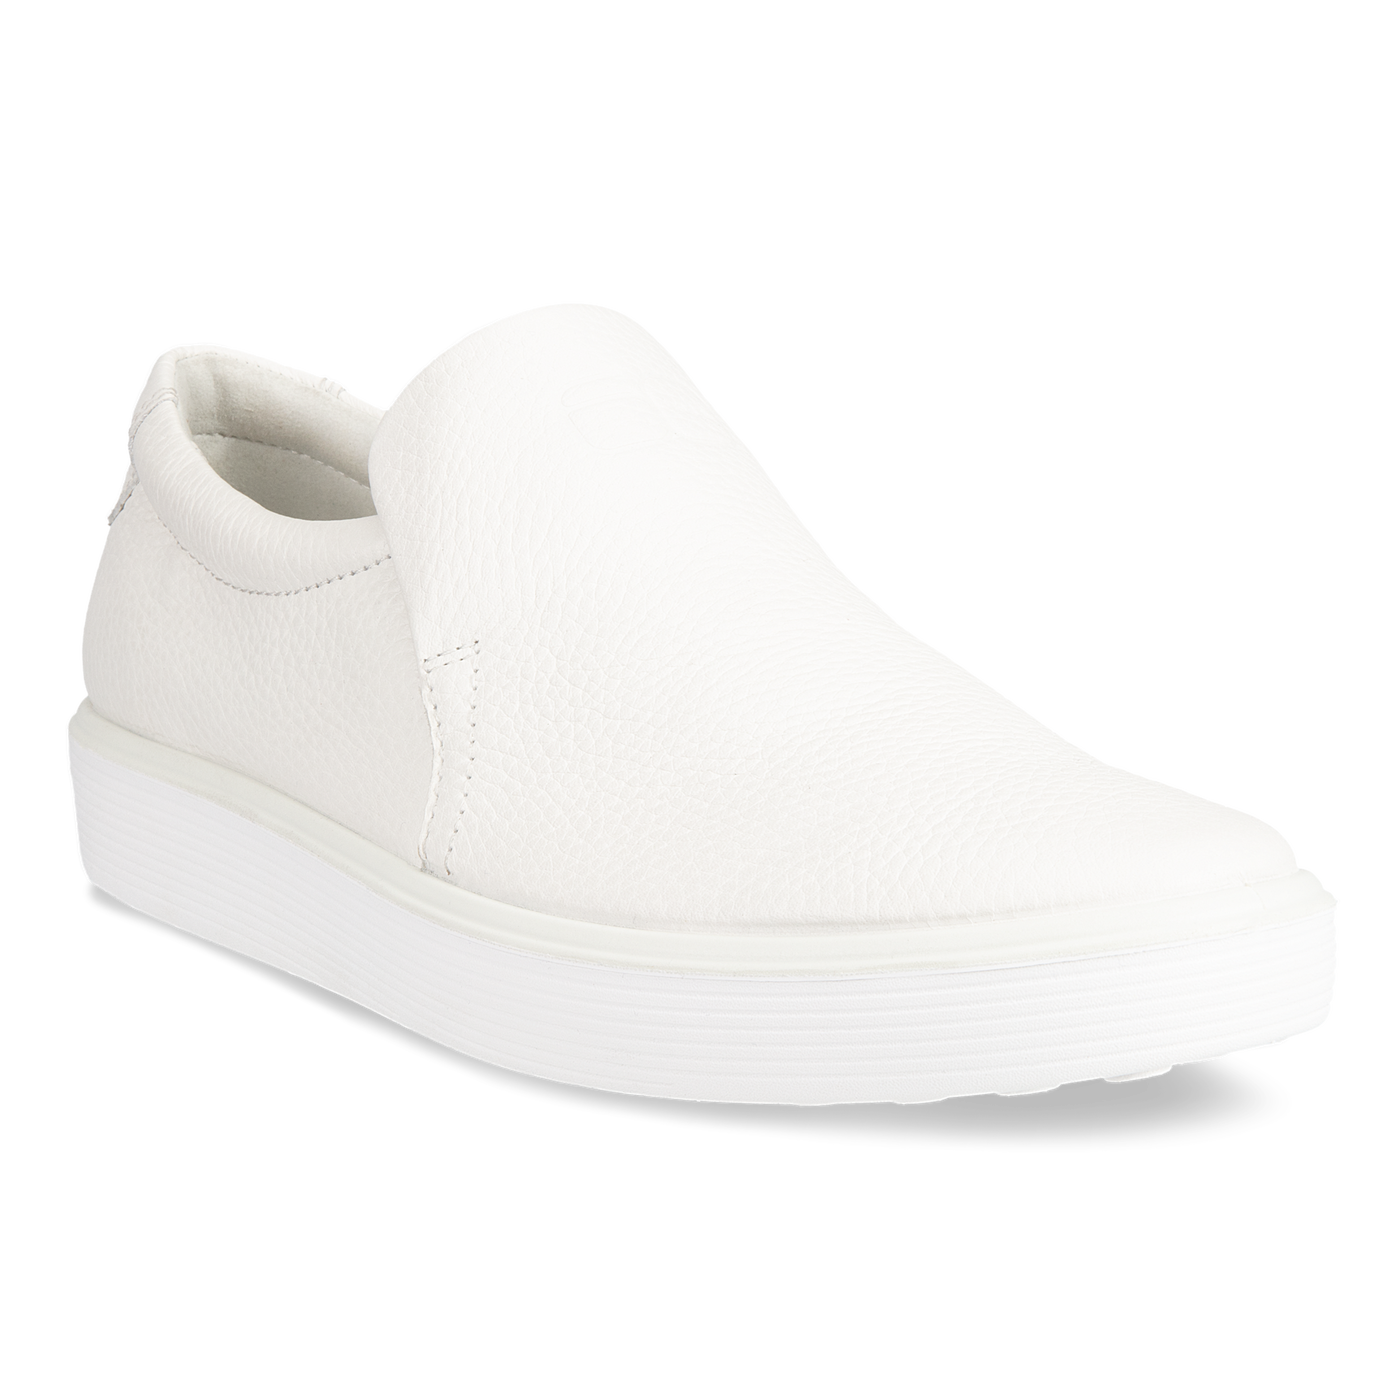 ECCO WOMEN'S SOFT 60 LIMITED EDITION SLIP-ON SHOES | Official ECCO® Shoes